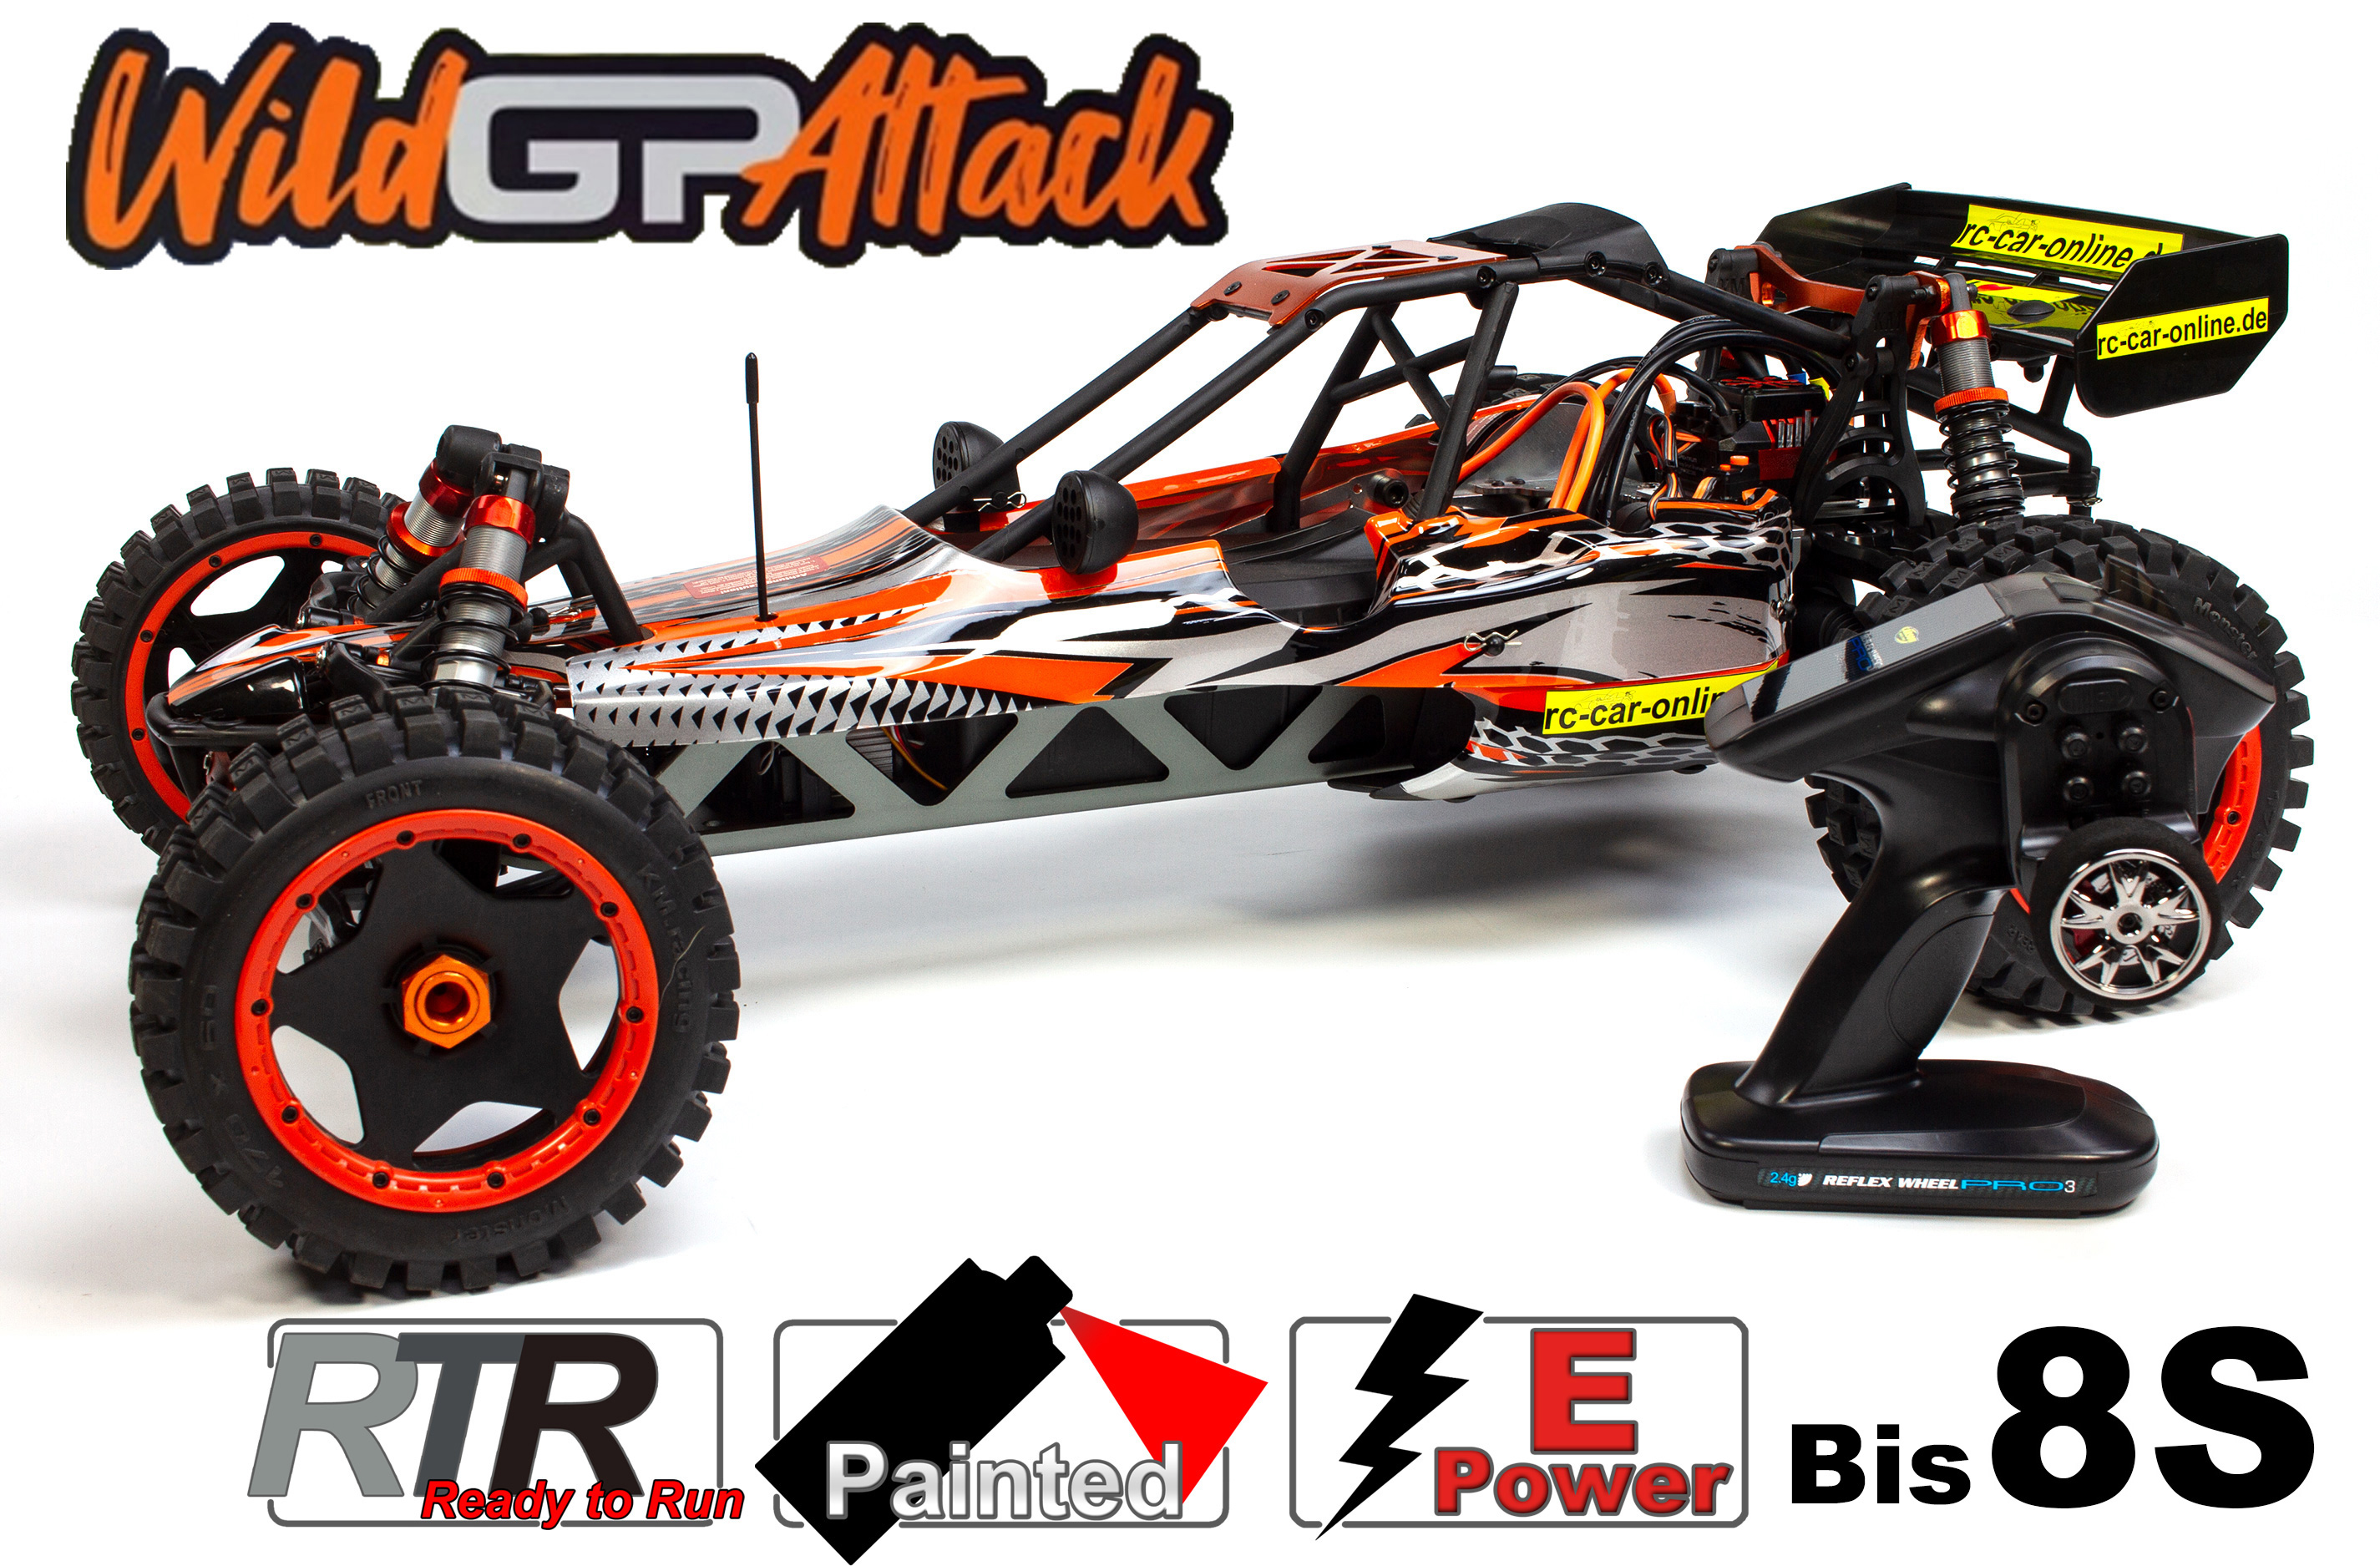 500304032/E Carson 1:5 Wild GP Attack Brushless 2.4GHz RTR, 200A / 700kV / up to 8S